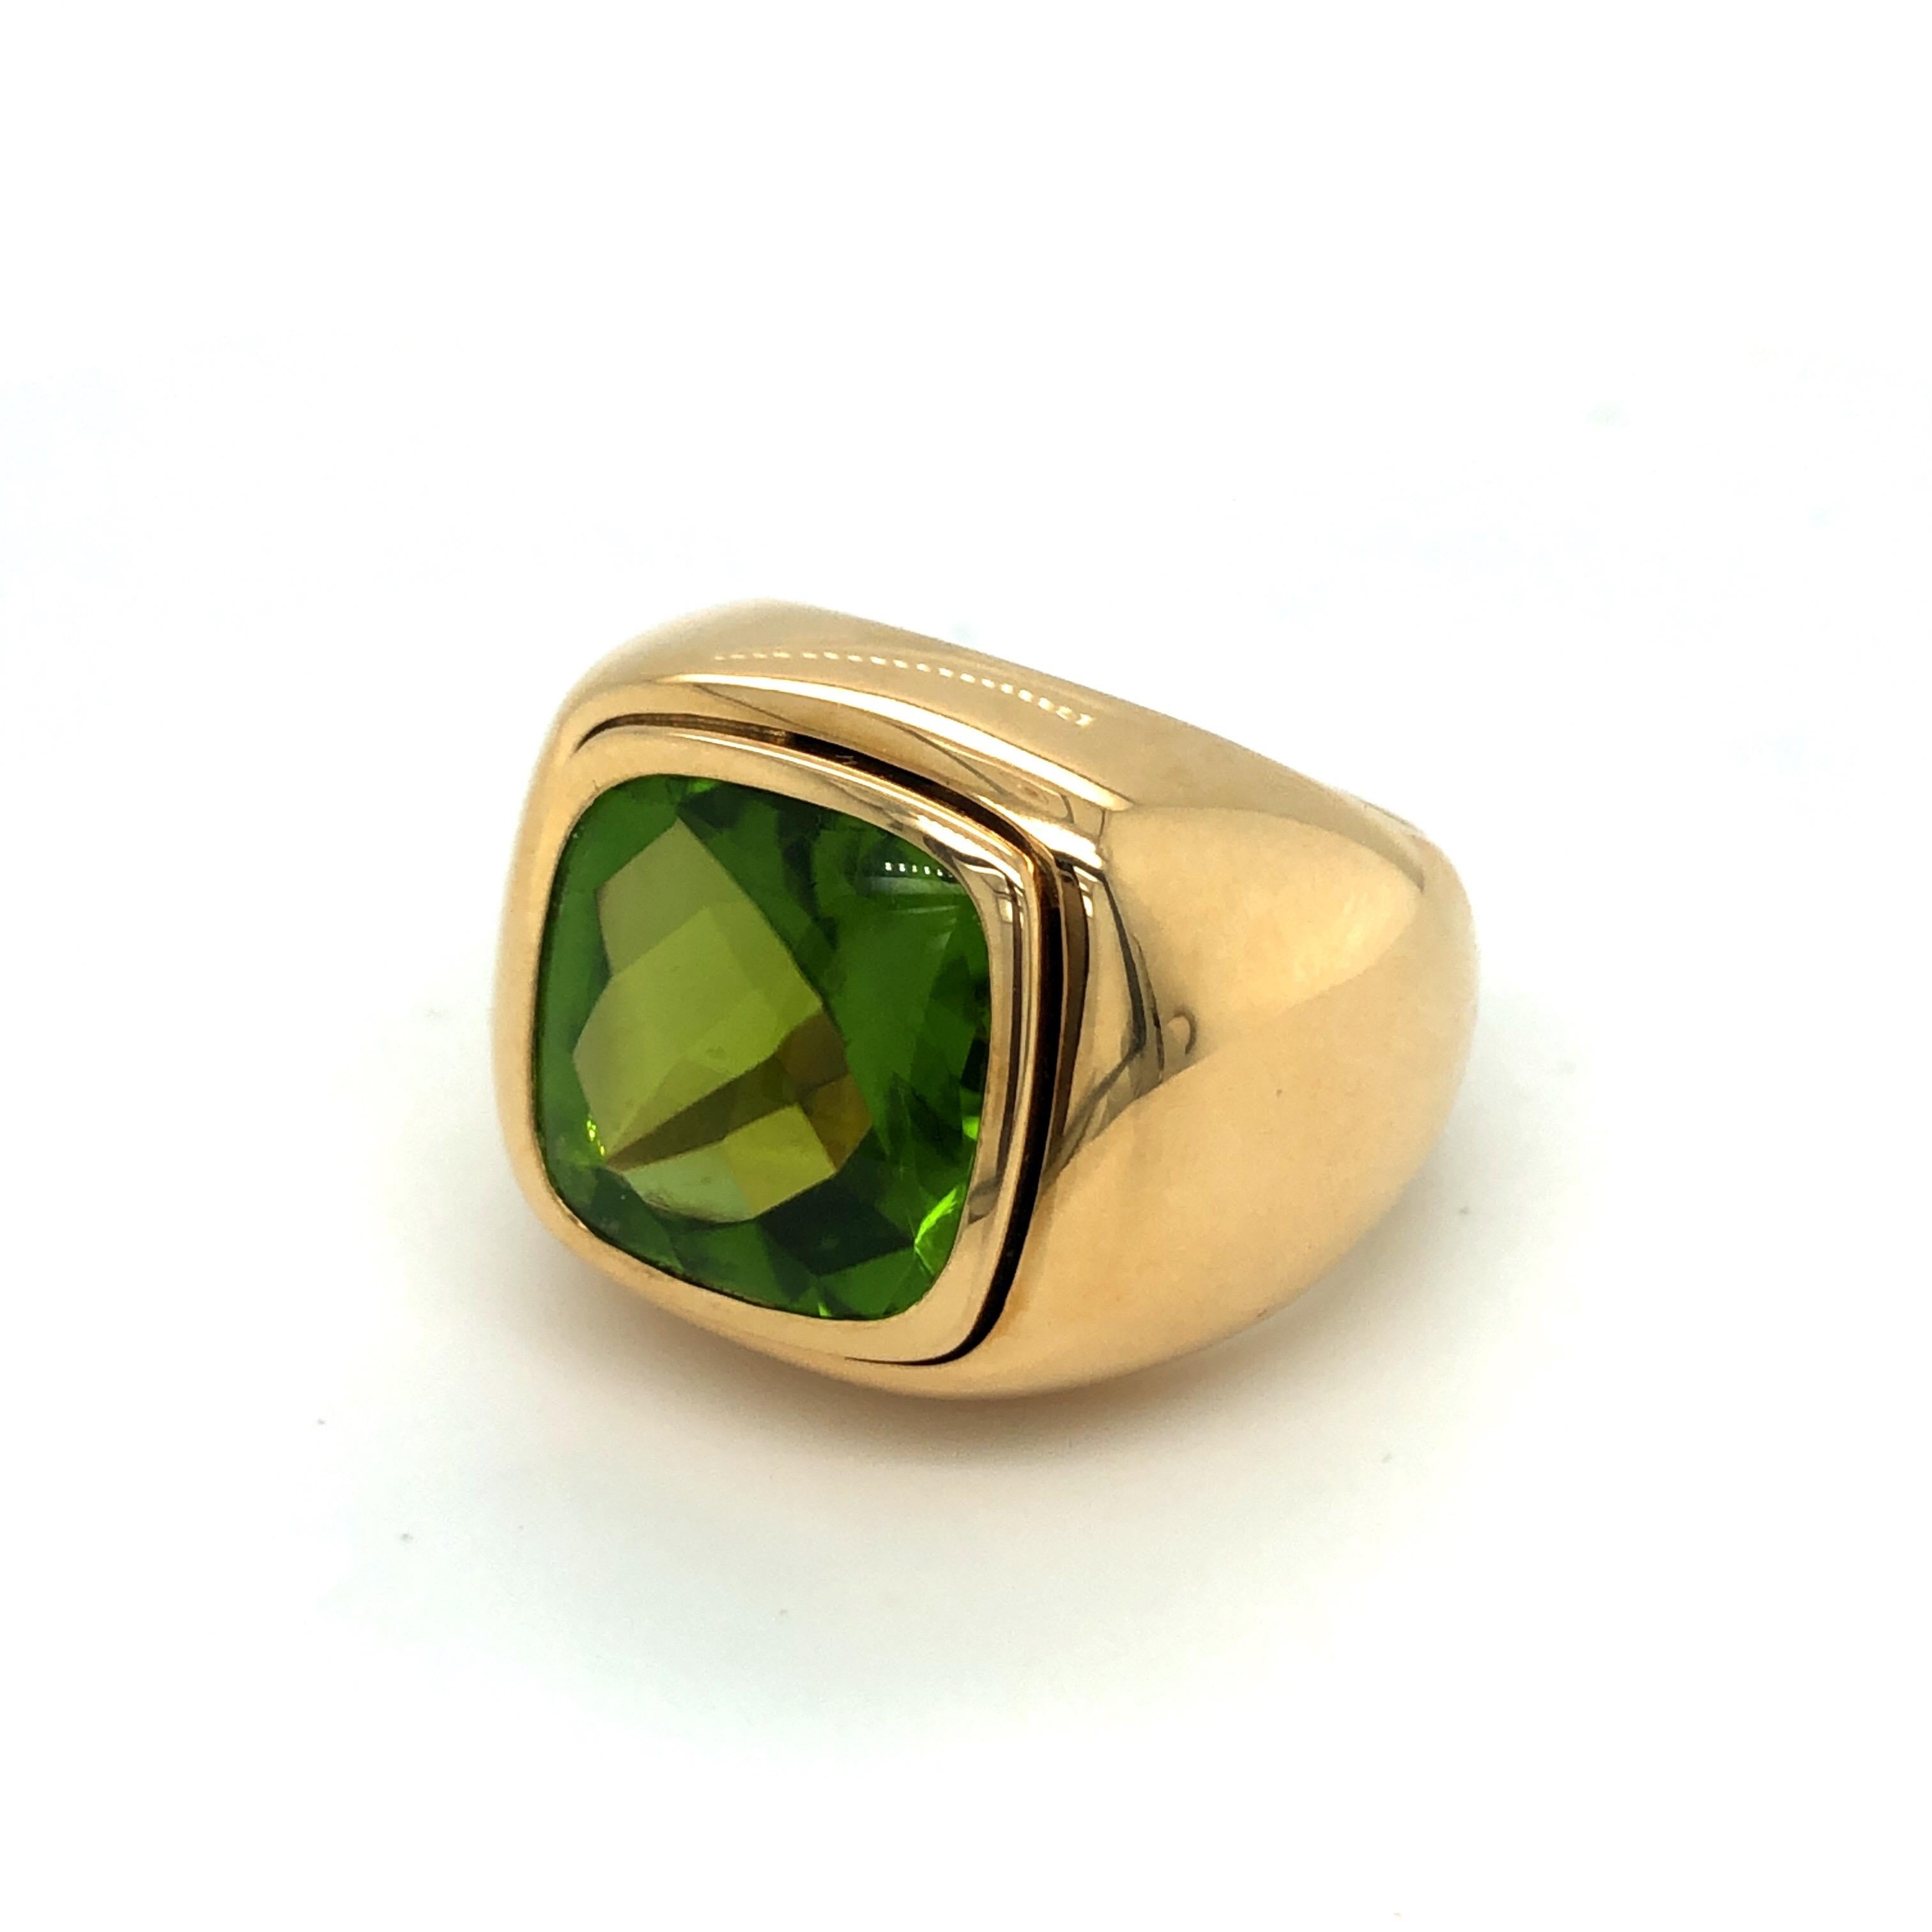 Impressive 18 karat yellow gold and peridot signet ring by the renowned Swiss jeweler Bucherer.
This statement ring is set with a vivid green peridot of 13.3 carats featuring a polished upper side and a faceted back side providing lively light